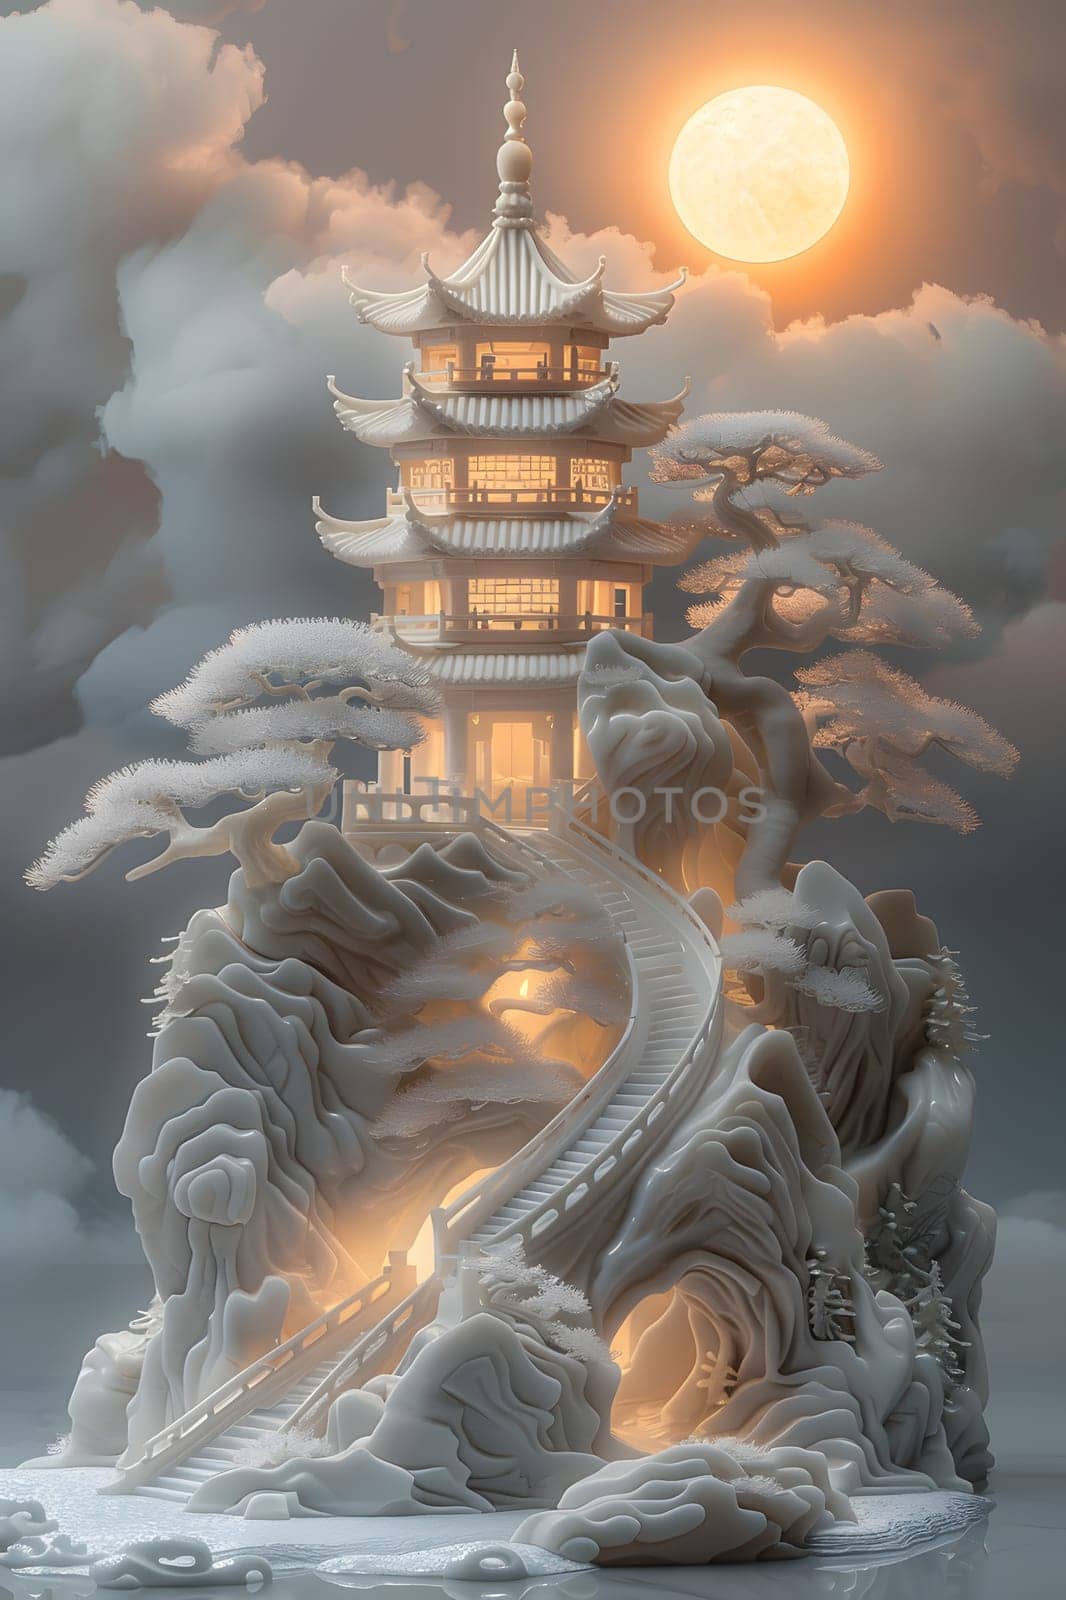 A sculpture of a pagoda, resembling a fictional character from mythology, perched on top of a snowcovered mountain under a cloudy sky